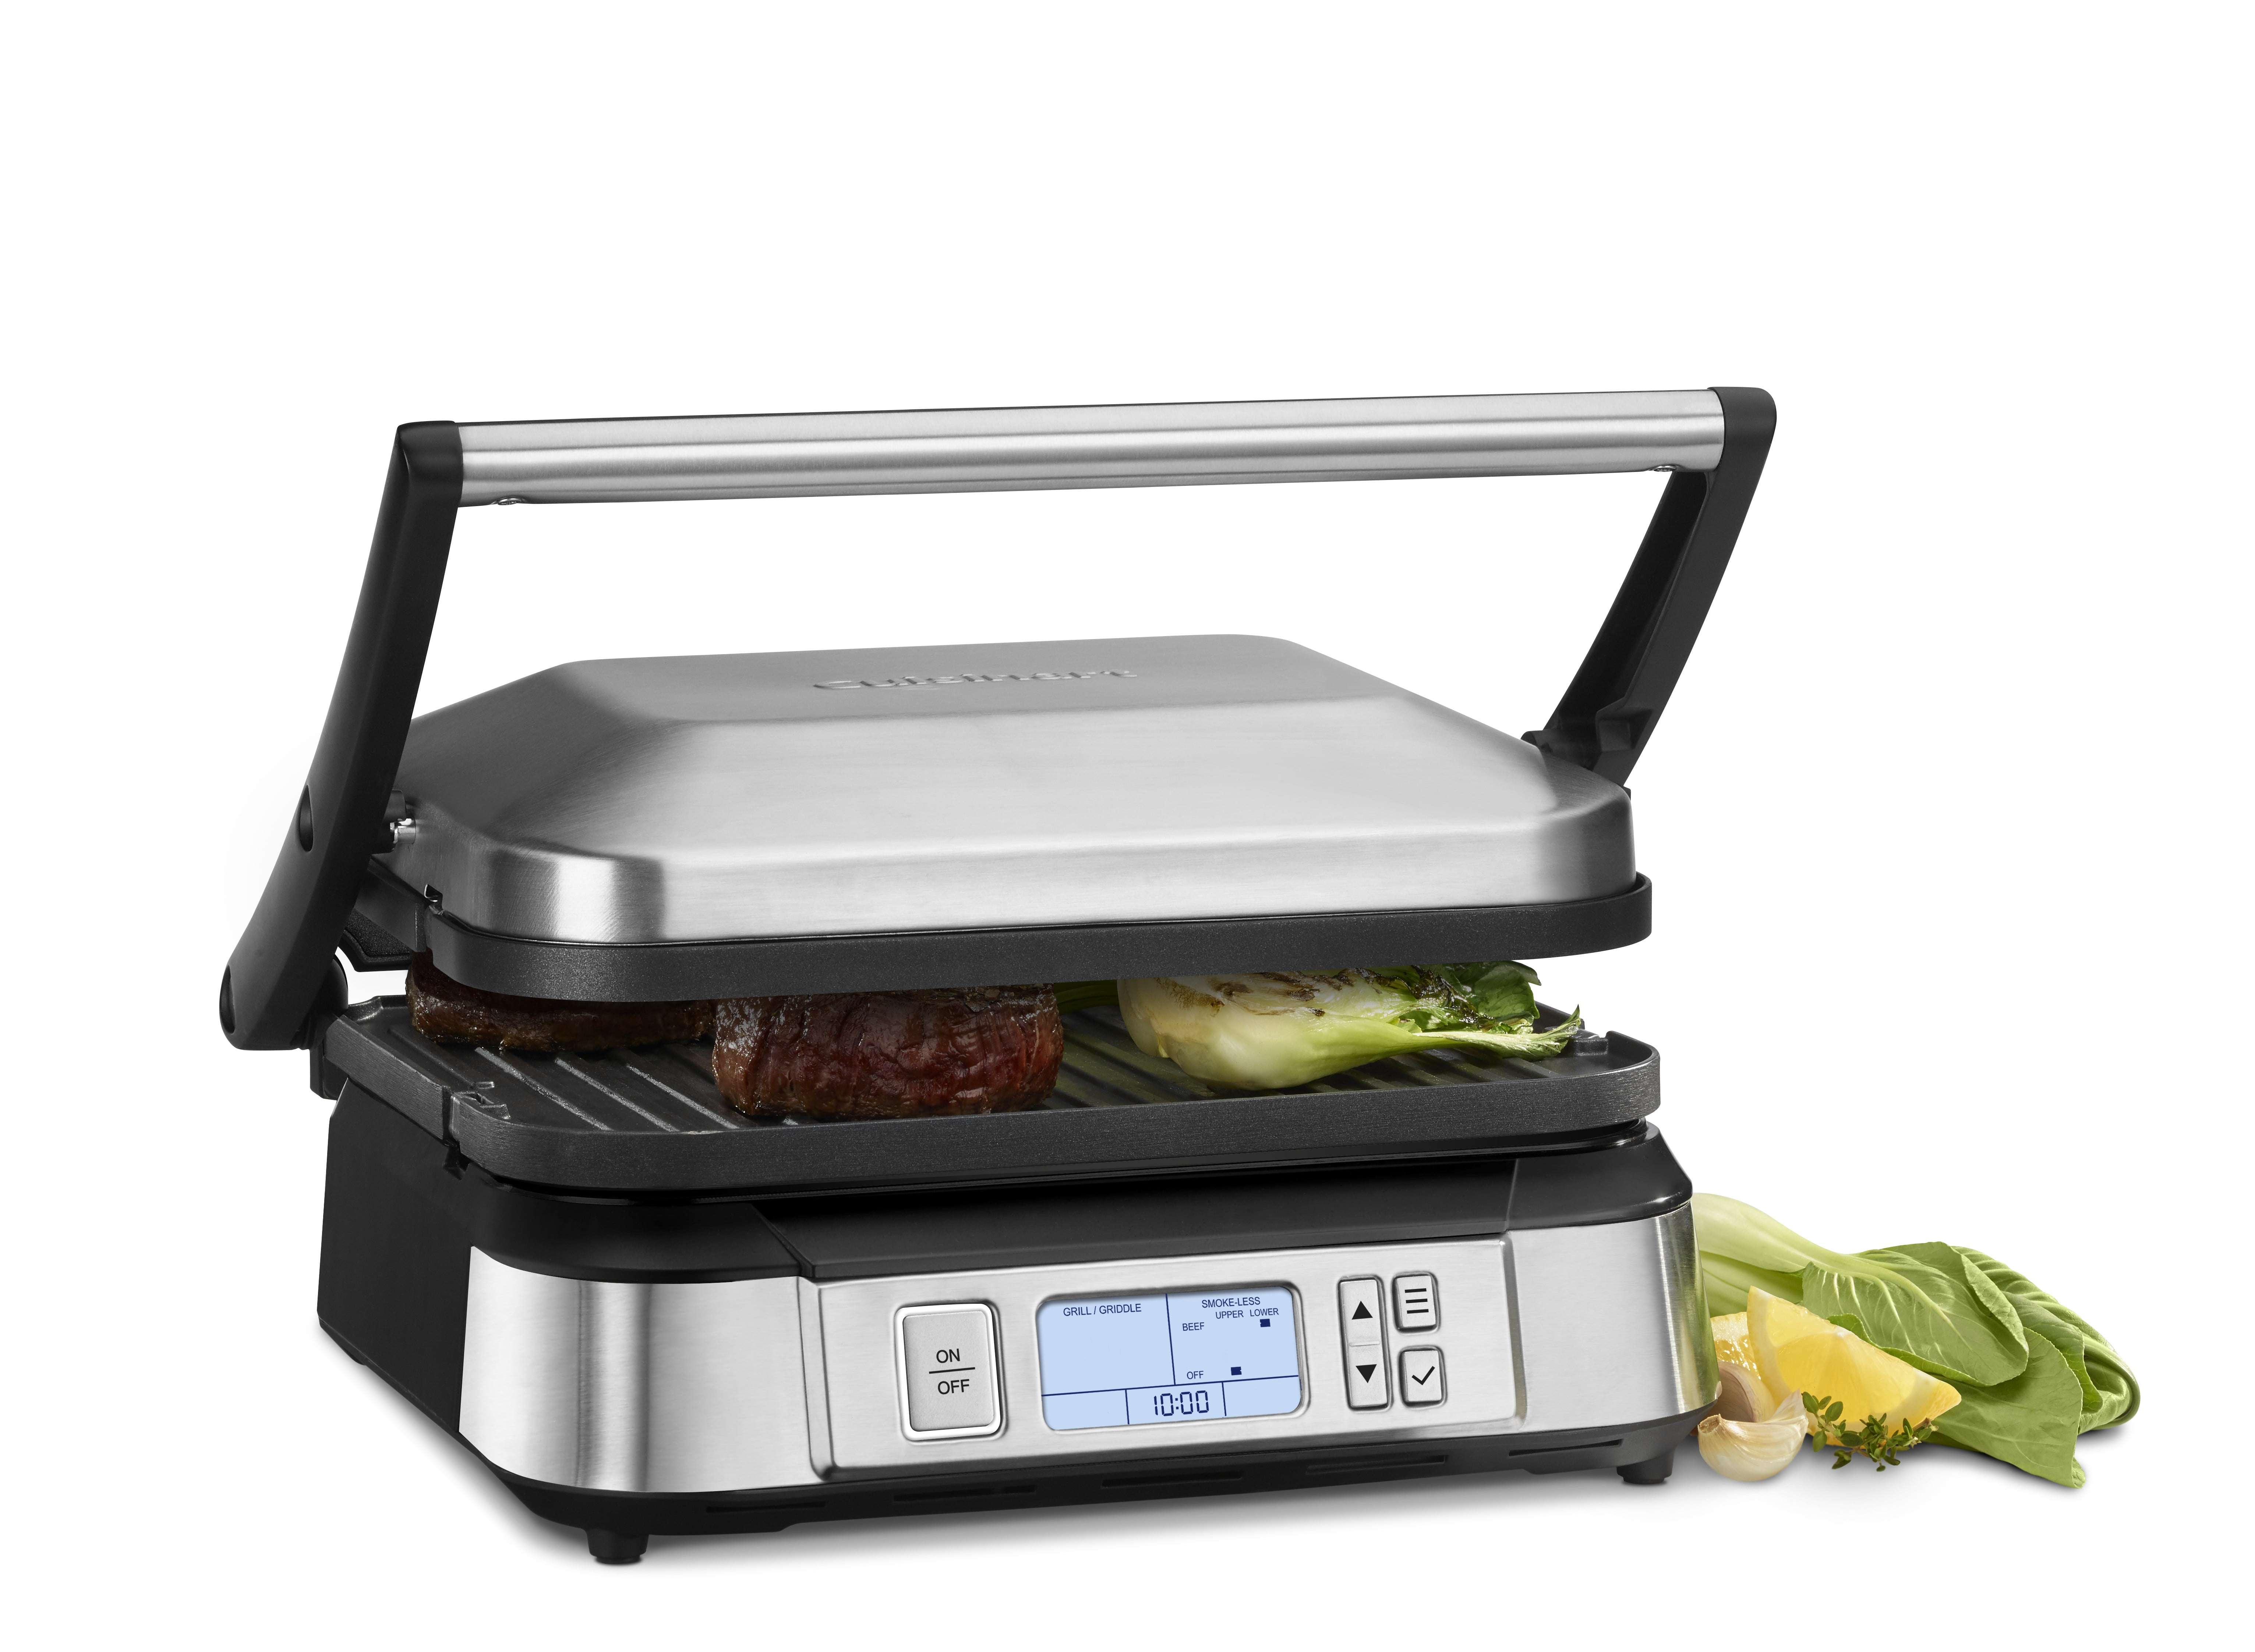 Cuisinart 5-in-1 Grill Griddler Panini Maker Bundle with Waffle Attachment ( GR-4N) - Includes Grill and Waffle Plates - Walmart.com